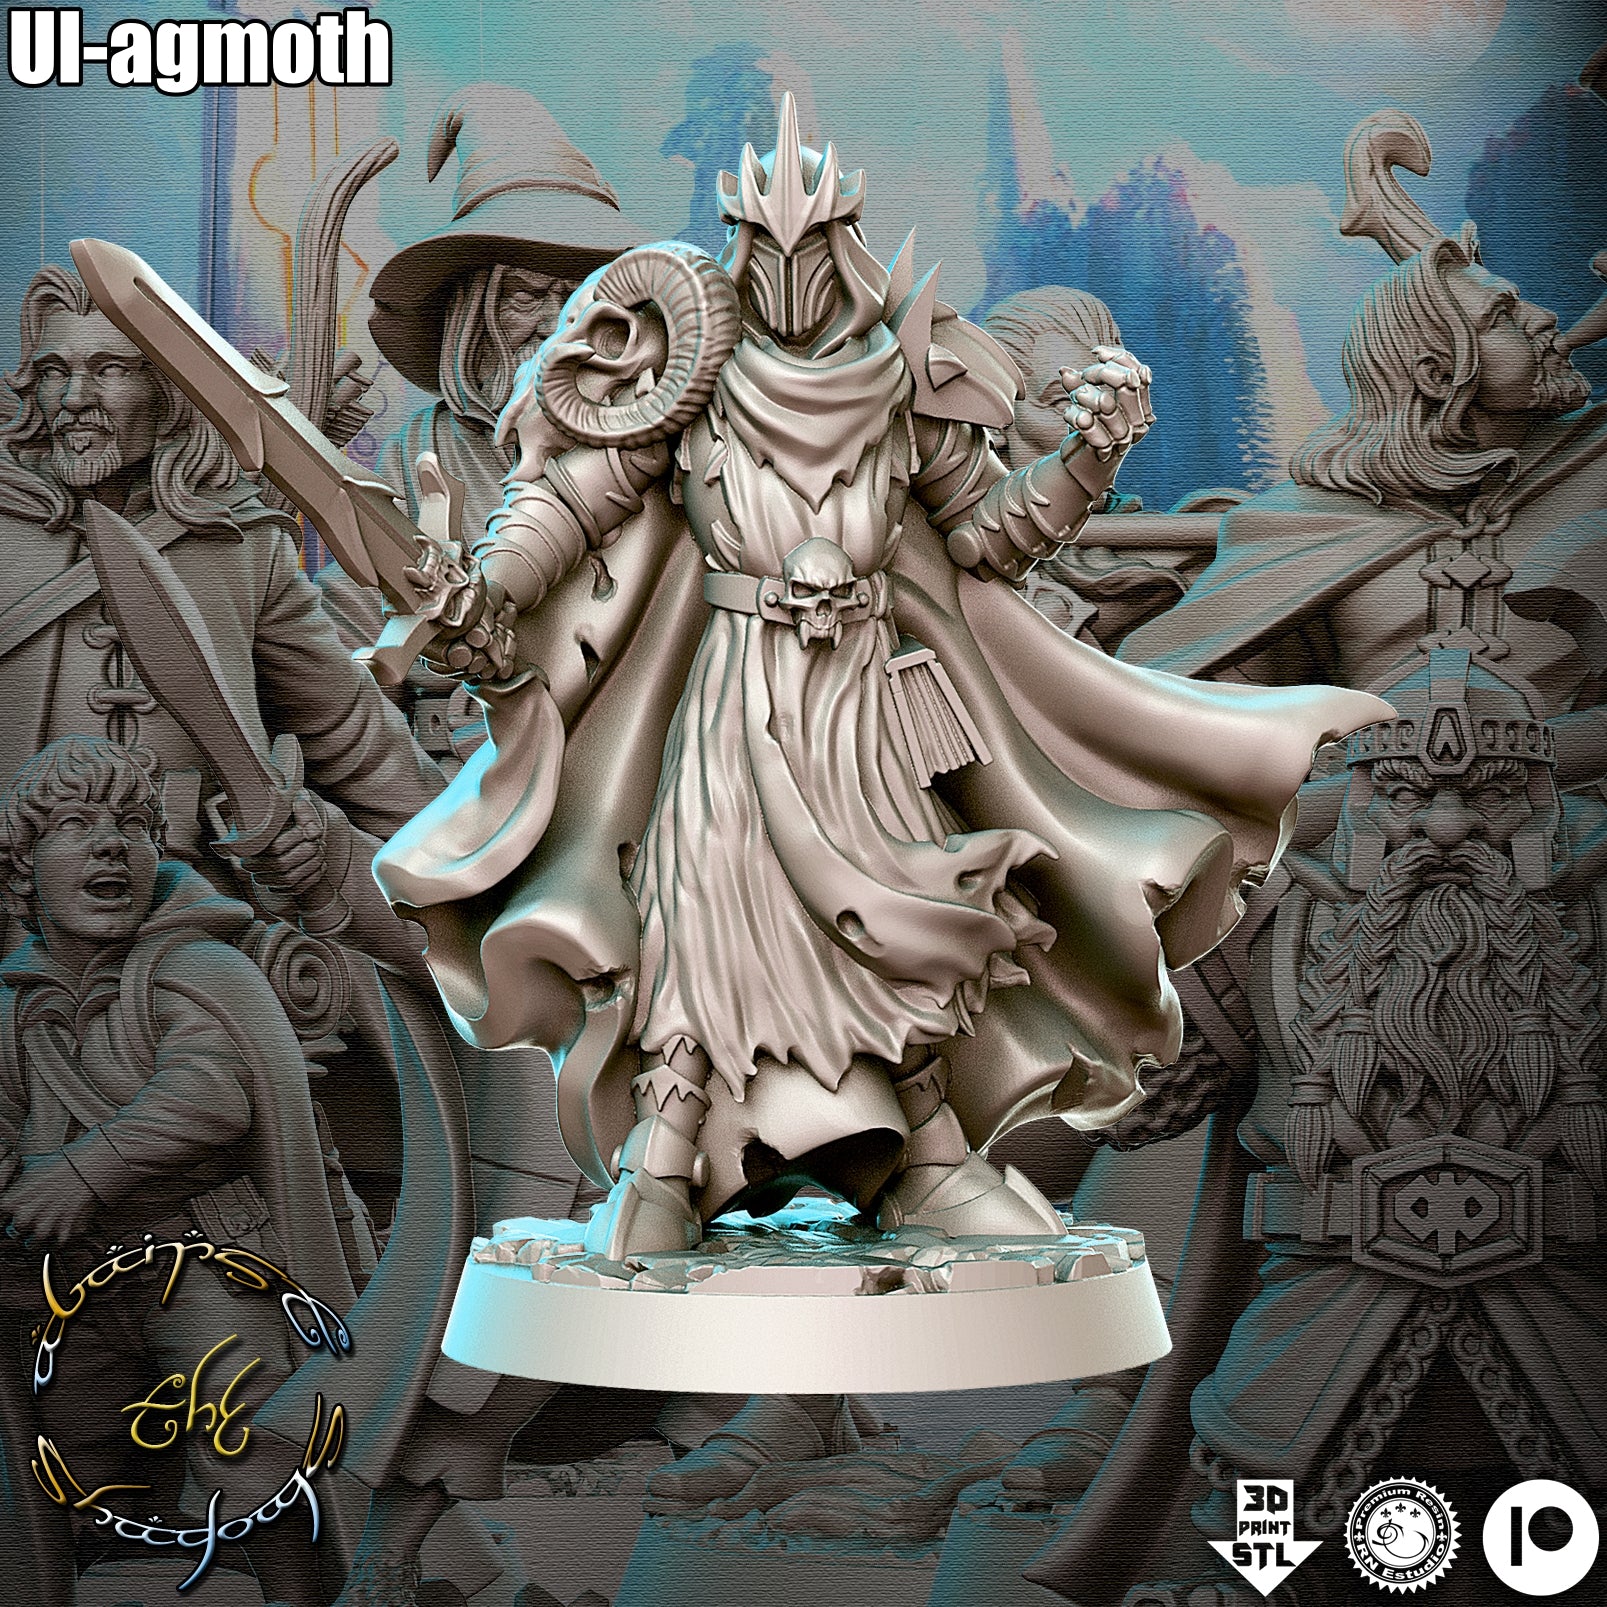 Ul-Agmoth - Against the Shadows - Green Wildling Miniatures SPECIAL ORDER